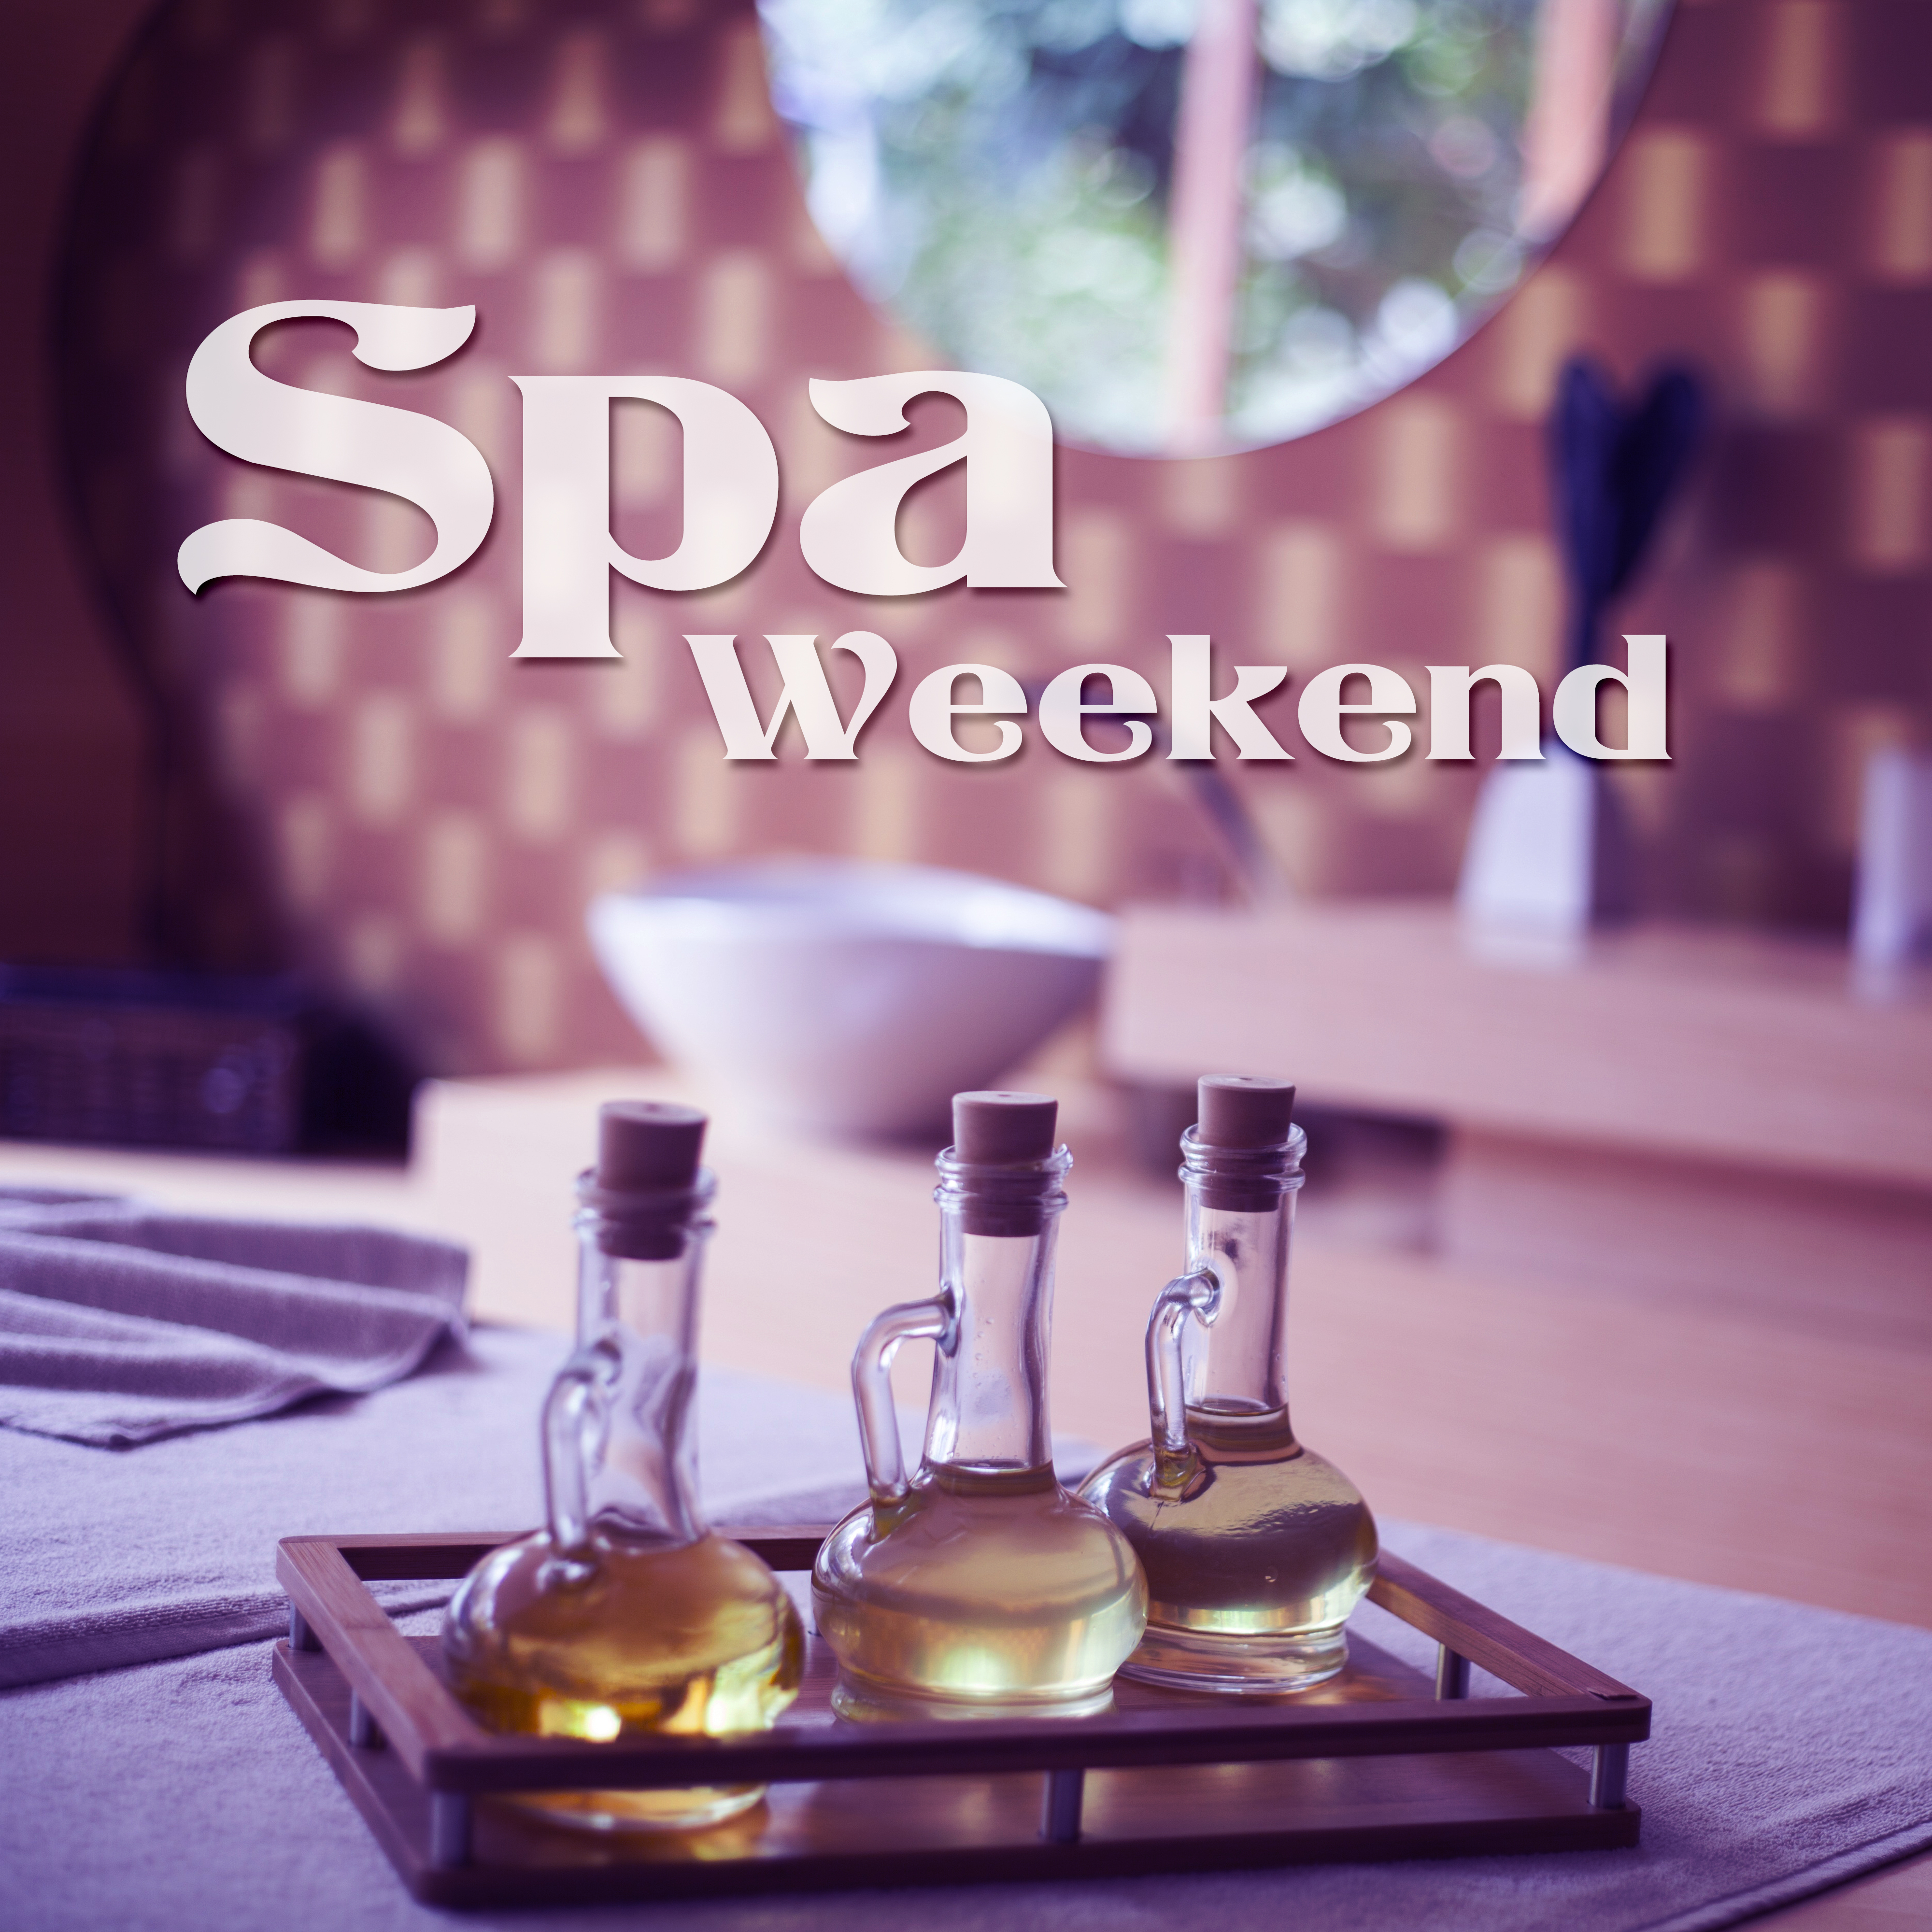 Spa Weekend – New Age Music for Massage, Bath Spa, Spa At Home, Relaxed Body & Mind, Relaxing Therapy